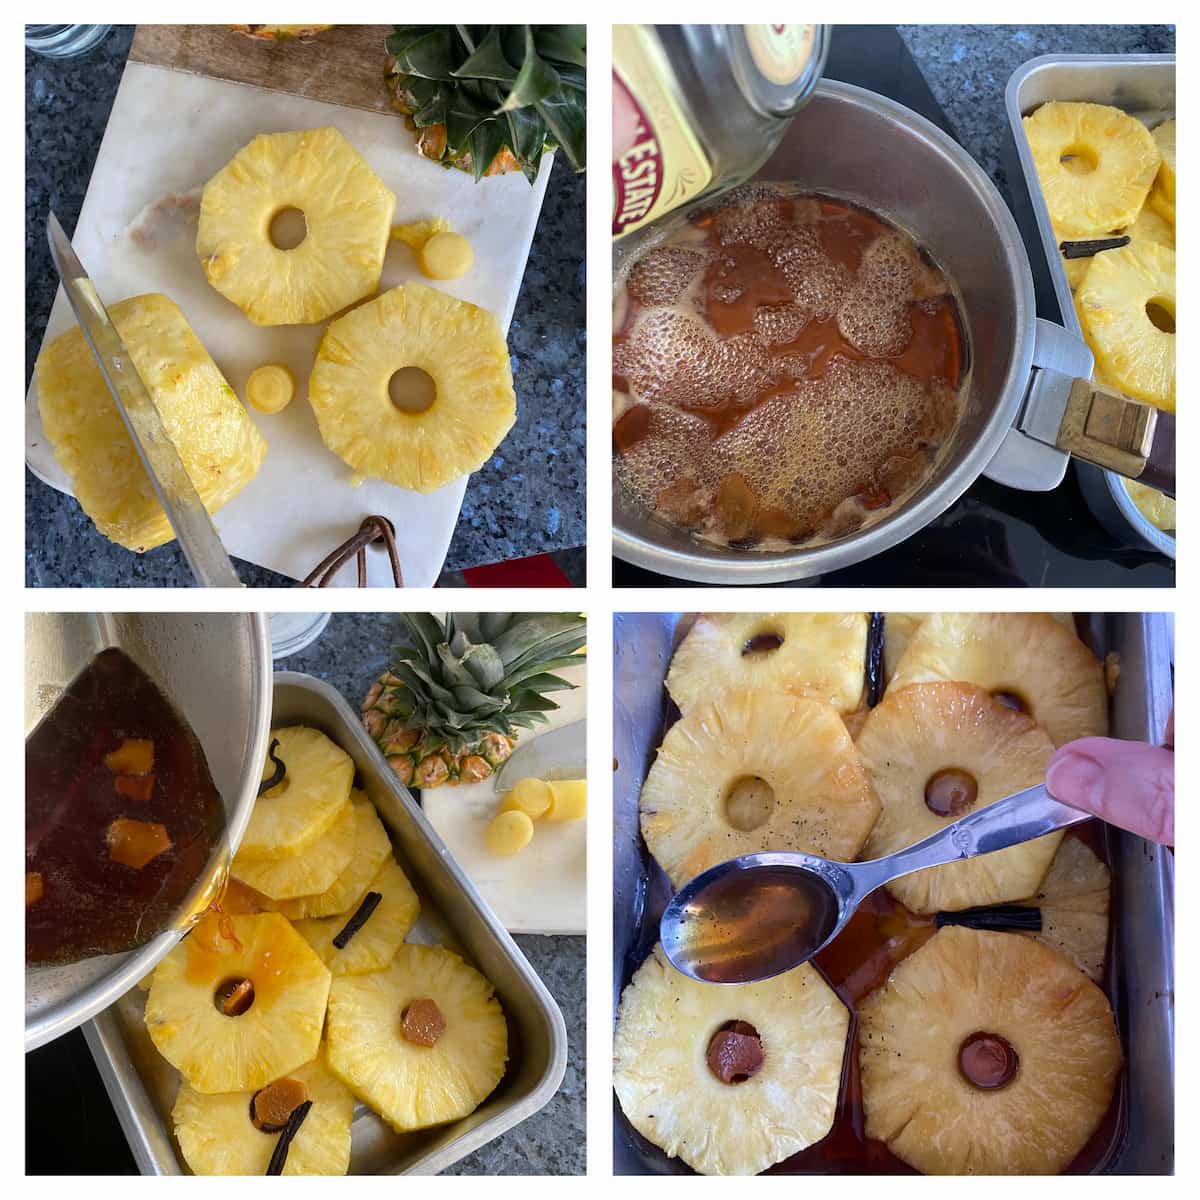 recipe steps - cut the pineapple into slices, add rum to the caramel and pour over the slices in a roasting tin and coat regularly